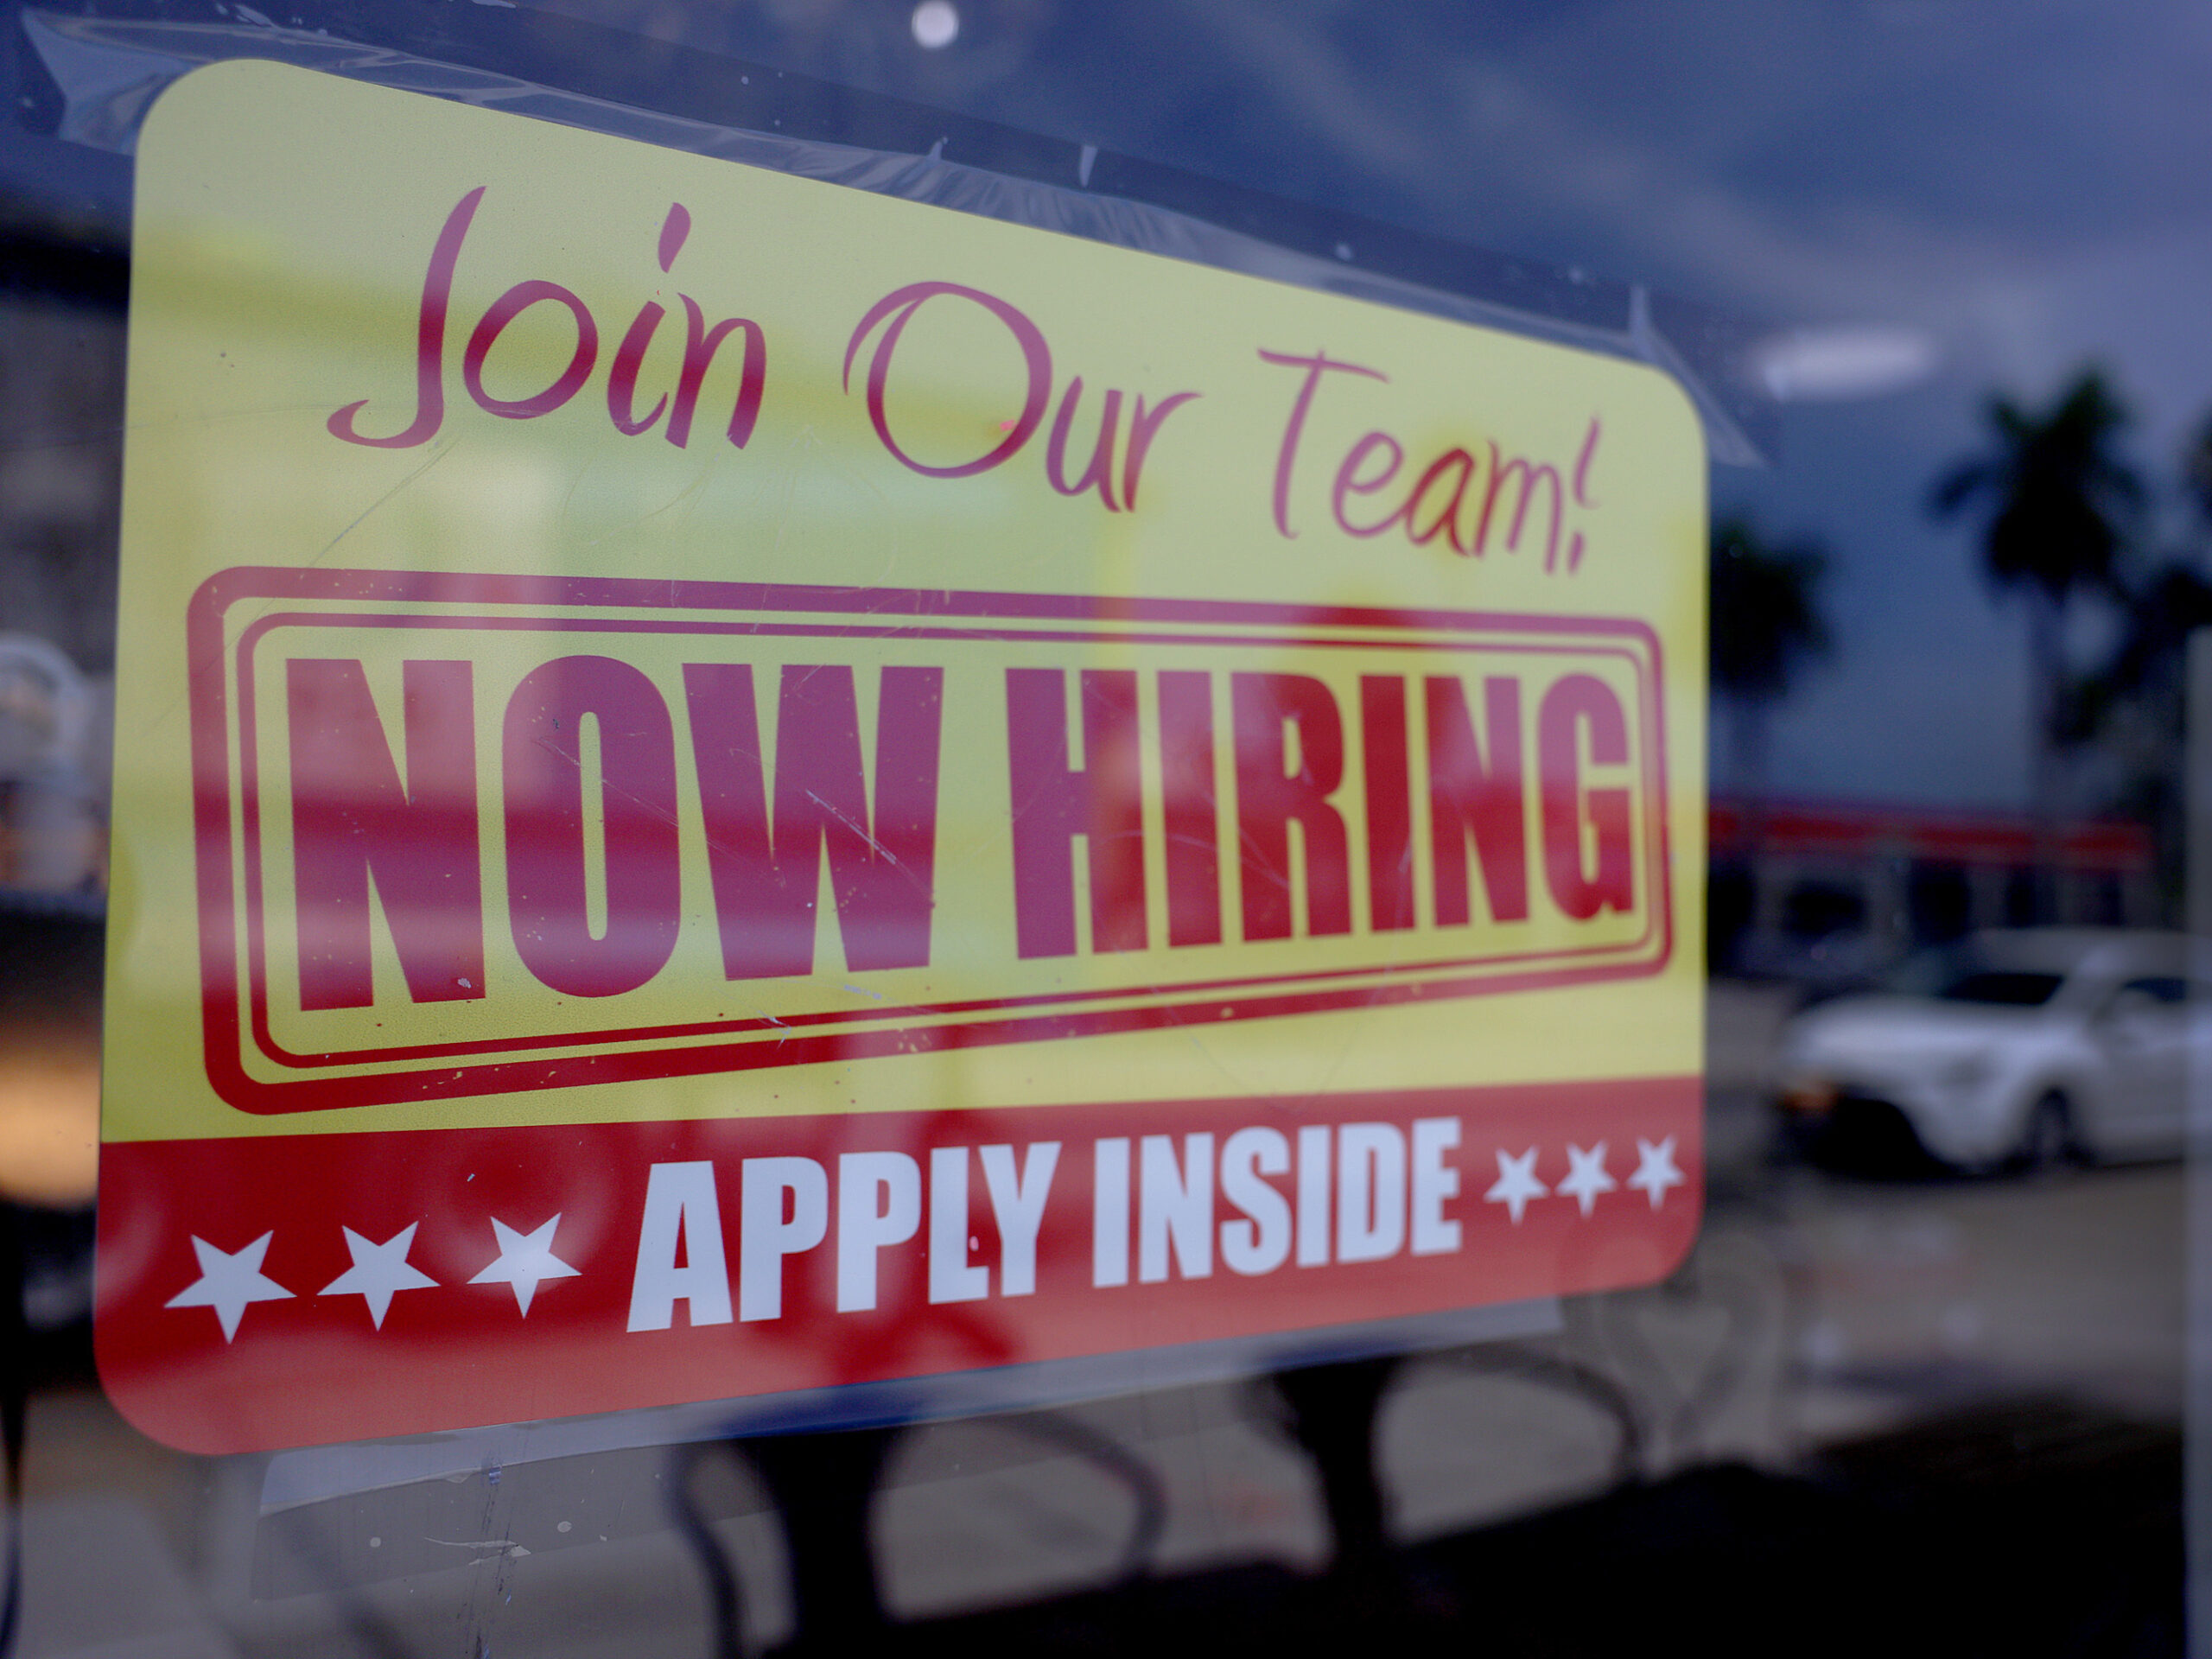 A sign seeking job applicants is seen in the window of a restaurant in Miami, Florida, on May 5, 2023.